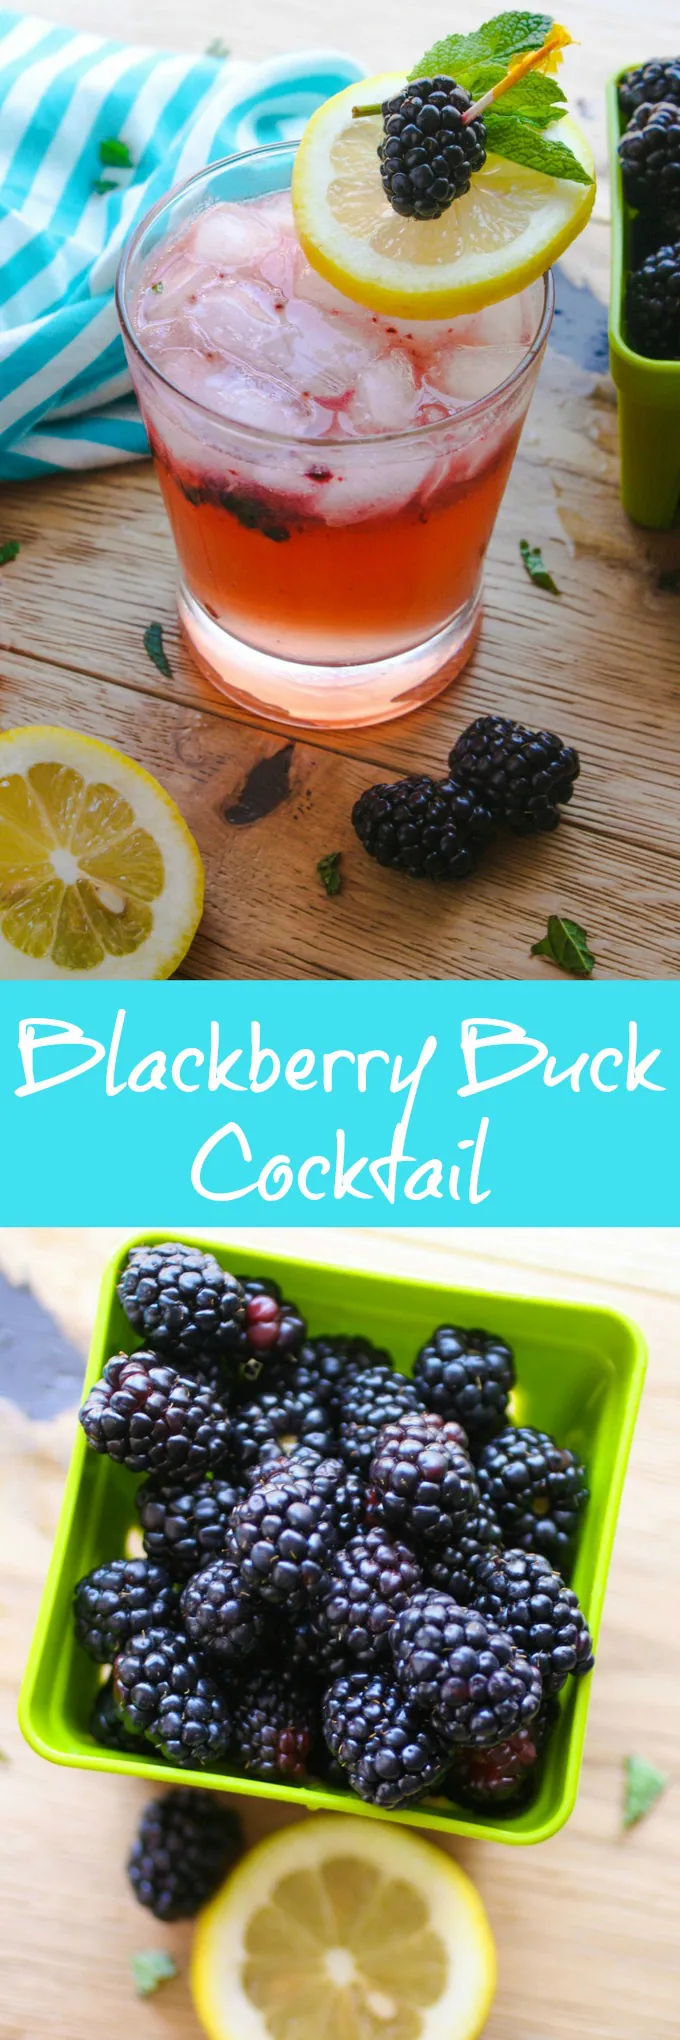 Blackberry Buck Cocktail is a tasty summer drink. You'll love the color and flavor!